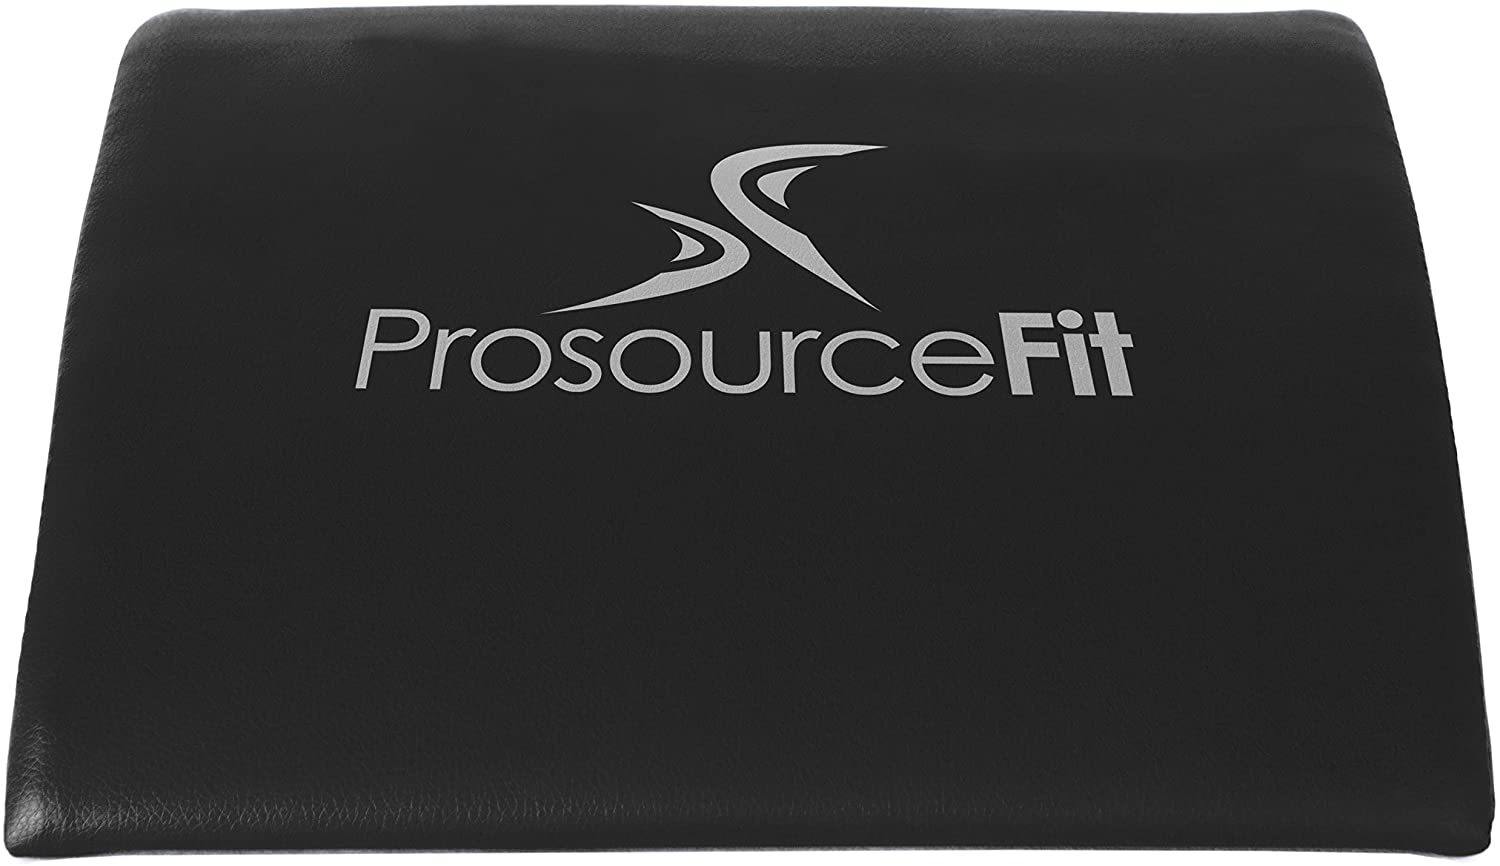 Prosource Fit Abdominal AB Exercise Mat Core Trainer - High Density